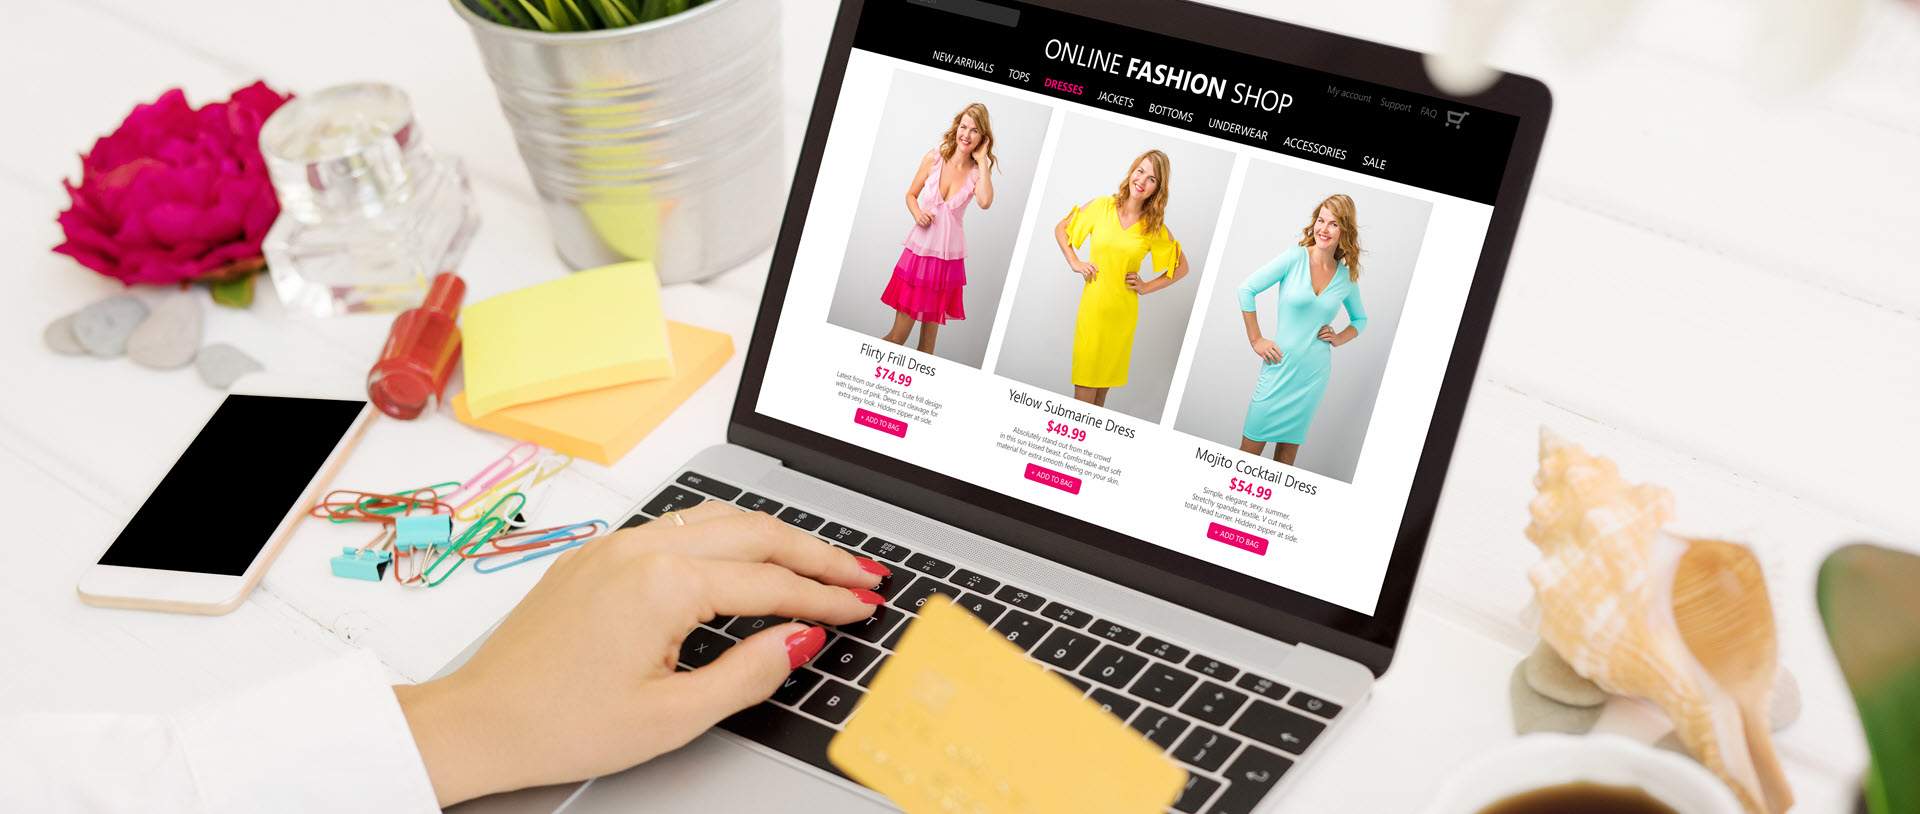 online fashion store on laptop at a woman's desk